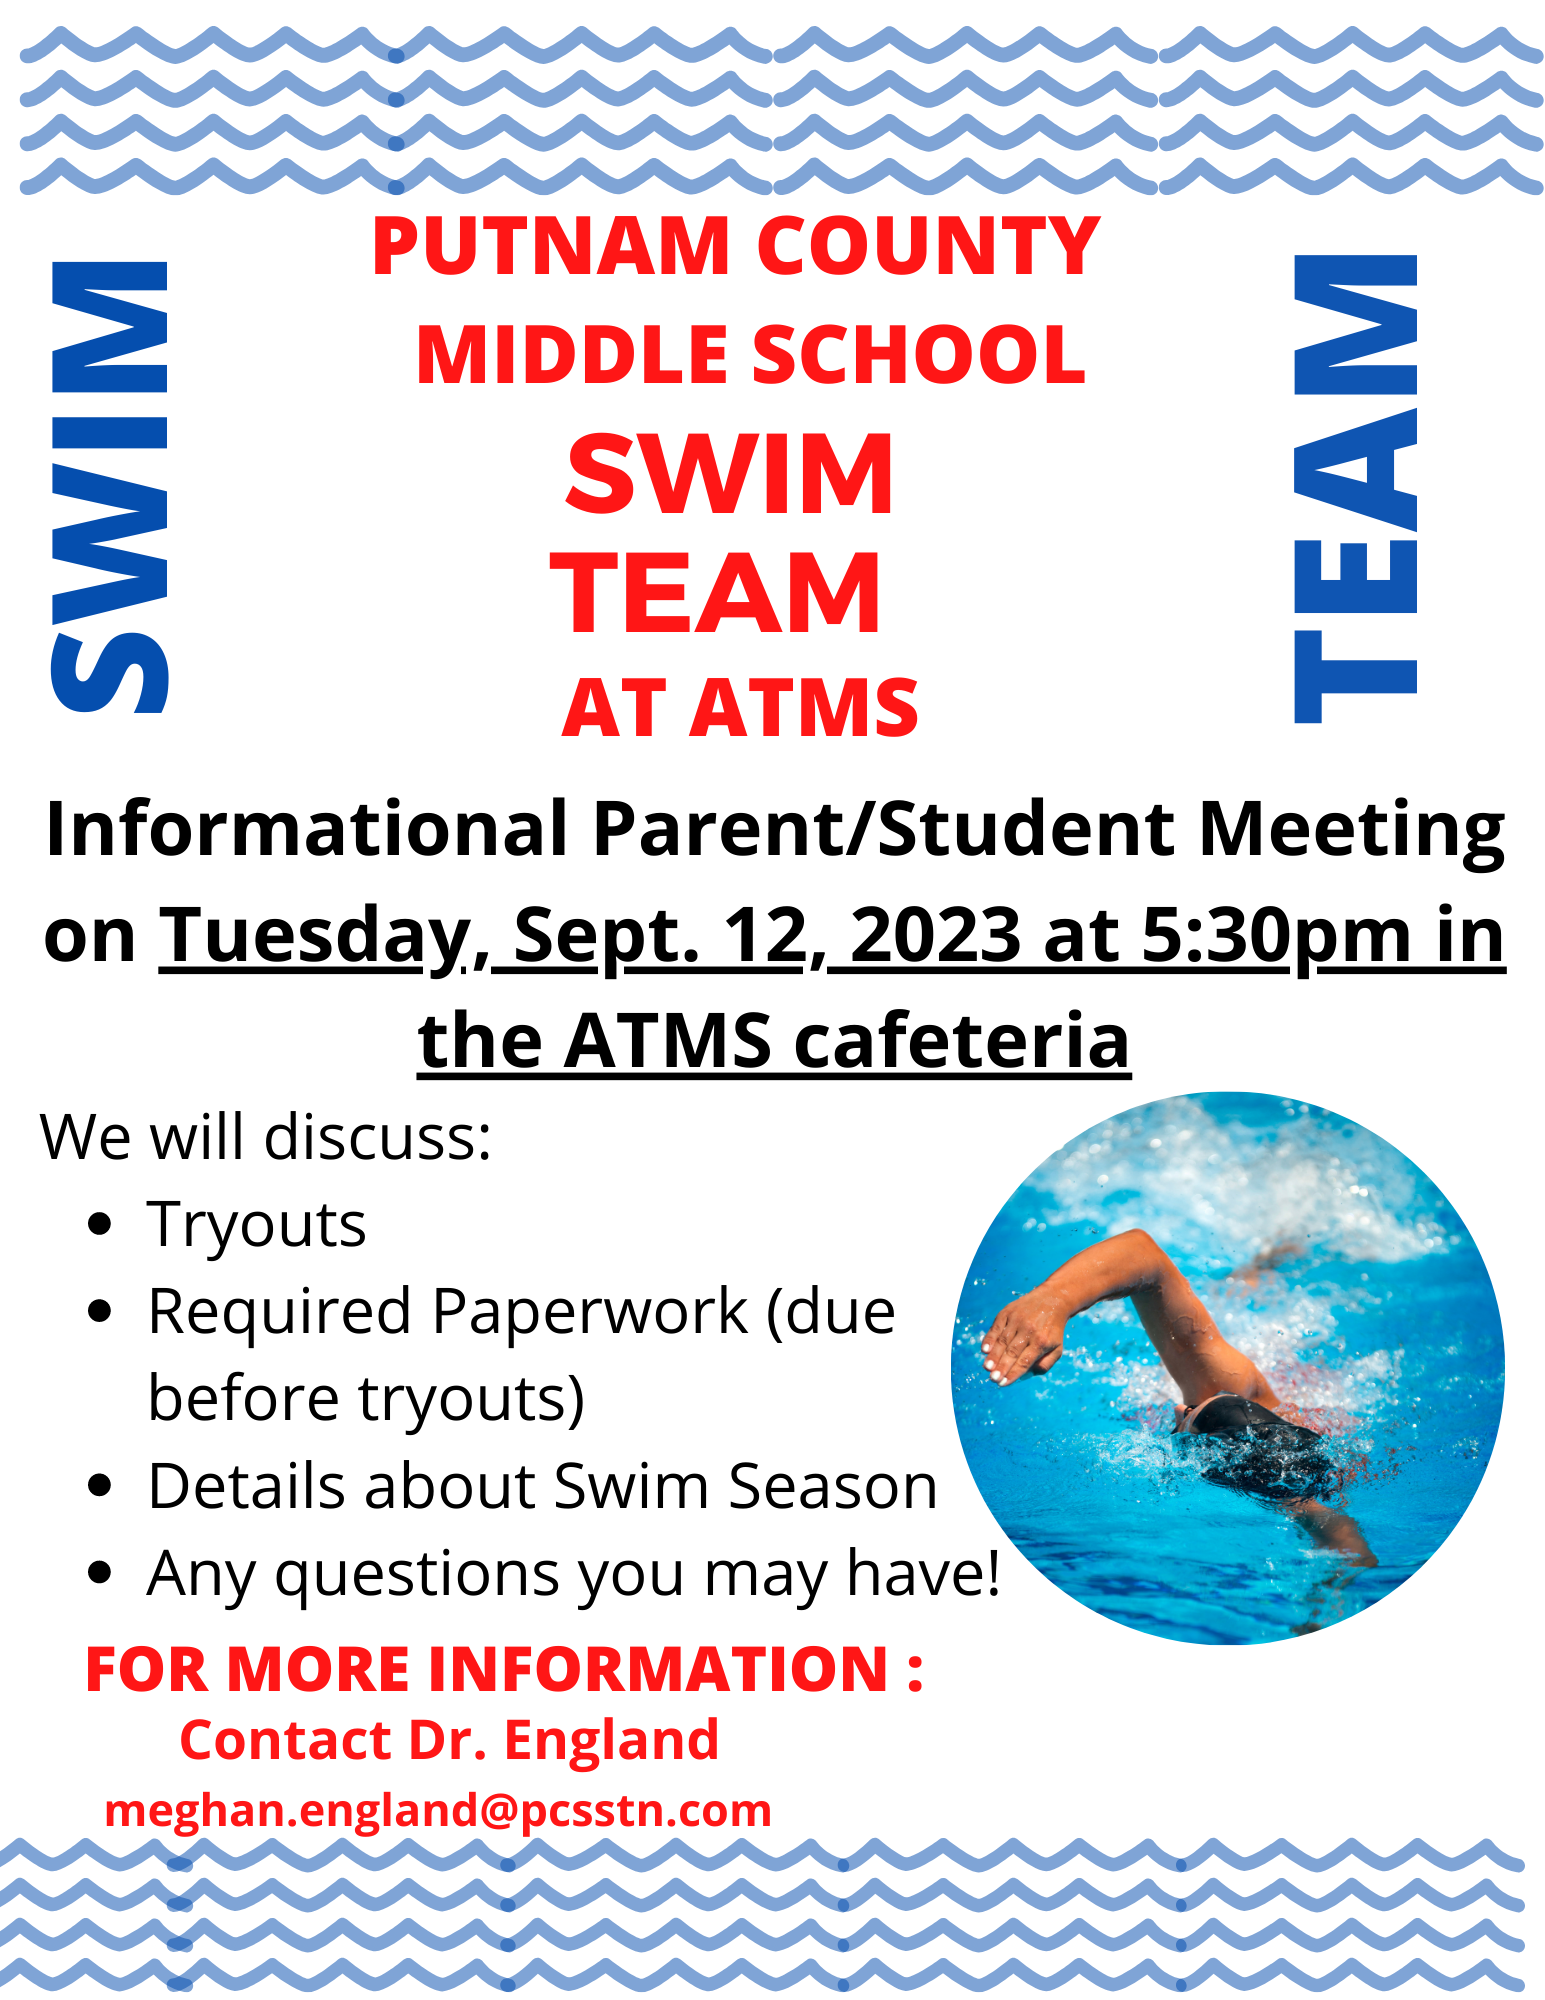 SWIM TEAM. PUTNAM COUNTY MIDDLE SCHOOL SWIM TEAM AT ATMS. Informational Parent/Student Meeting on Tuesday, Sept. 13 at 5:30 p.m.Must have physical dated April 15, 2022 or later. Must be a good swimmer. FOR MORE INFORMATION: Contact Dr. England meghan.england@pcsstn.com